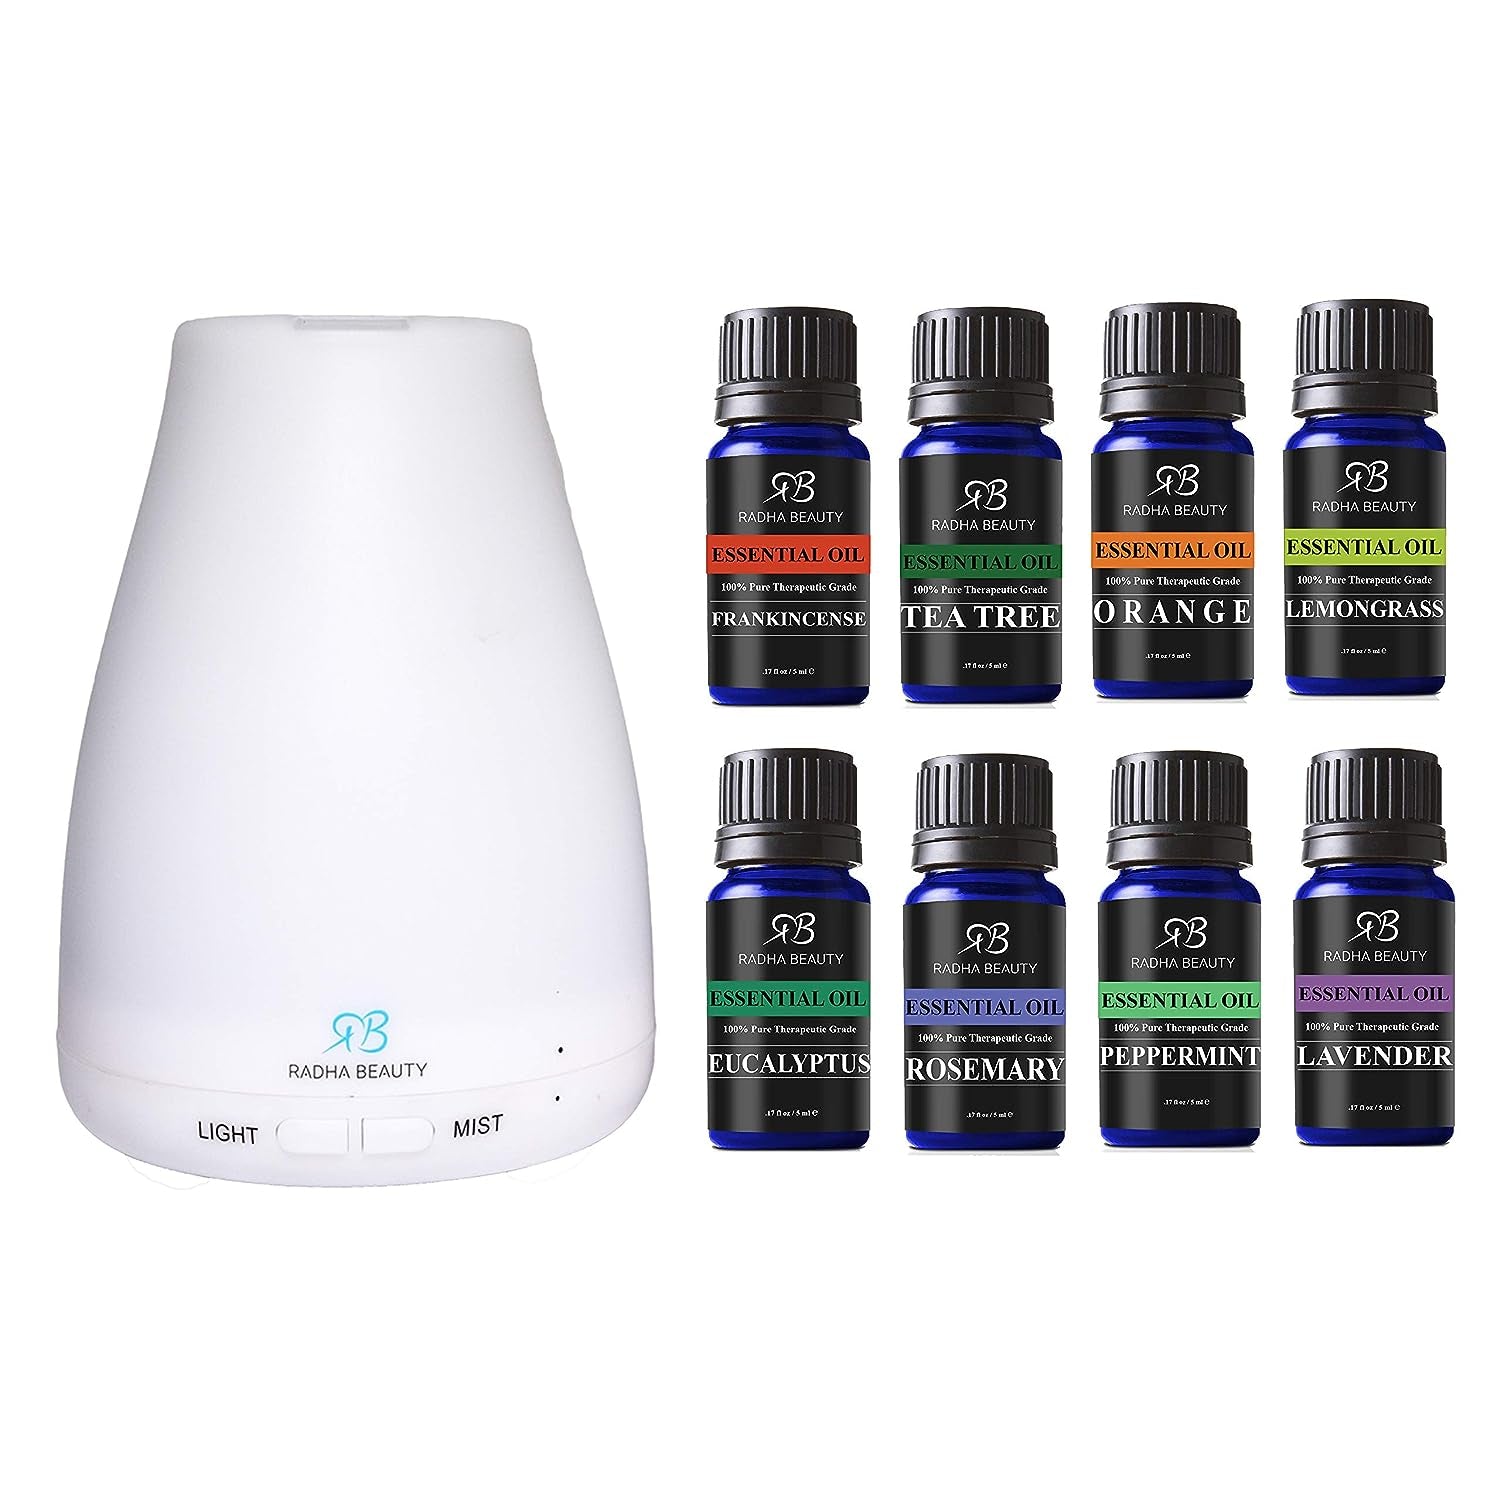 Aromatherapy Top 8 Essential Oil and Diffuser Gift Set - Peppermint, Tea Tree, Lavender & Eucalyptus - Auto Shut-Off and 7 Color LED Lights - Therapeutic Grade Oils by